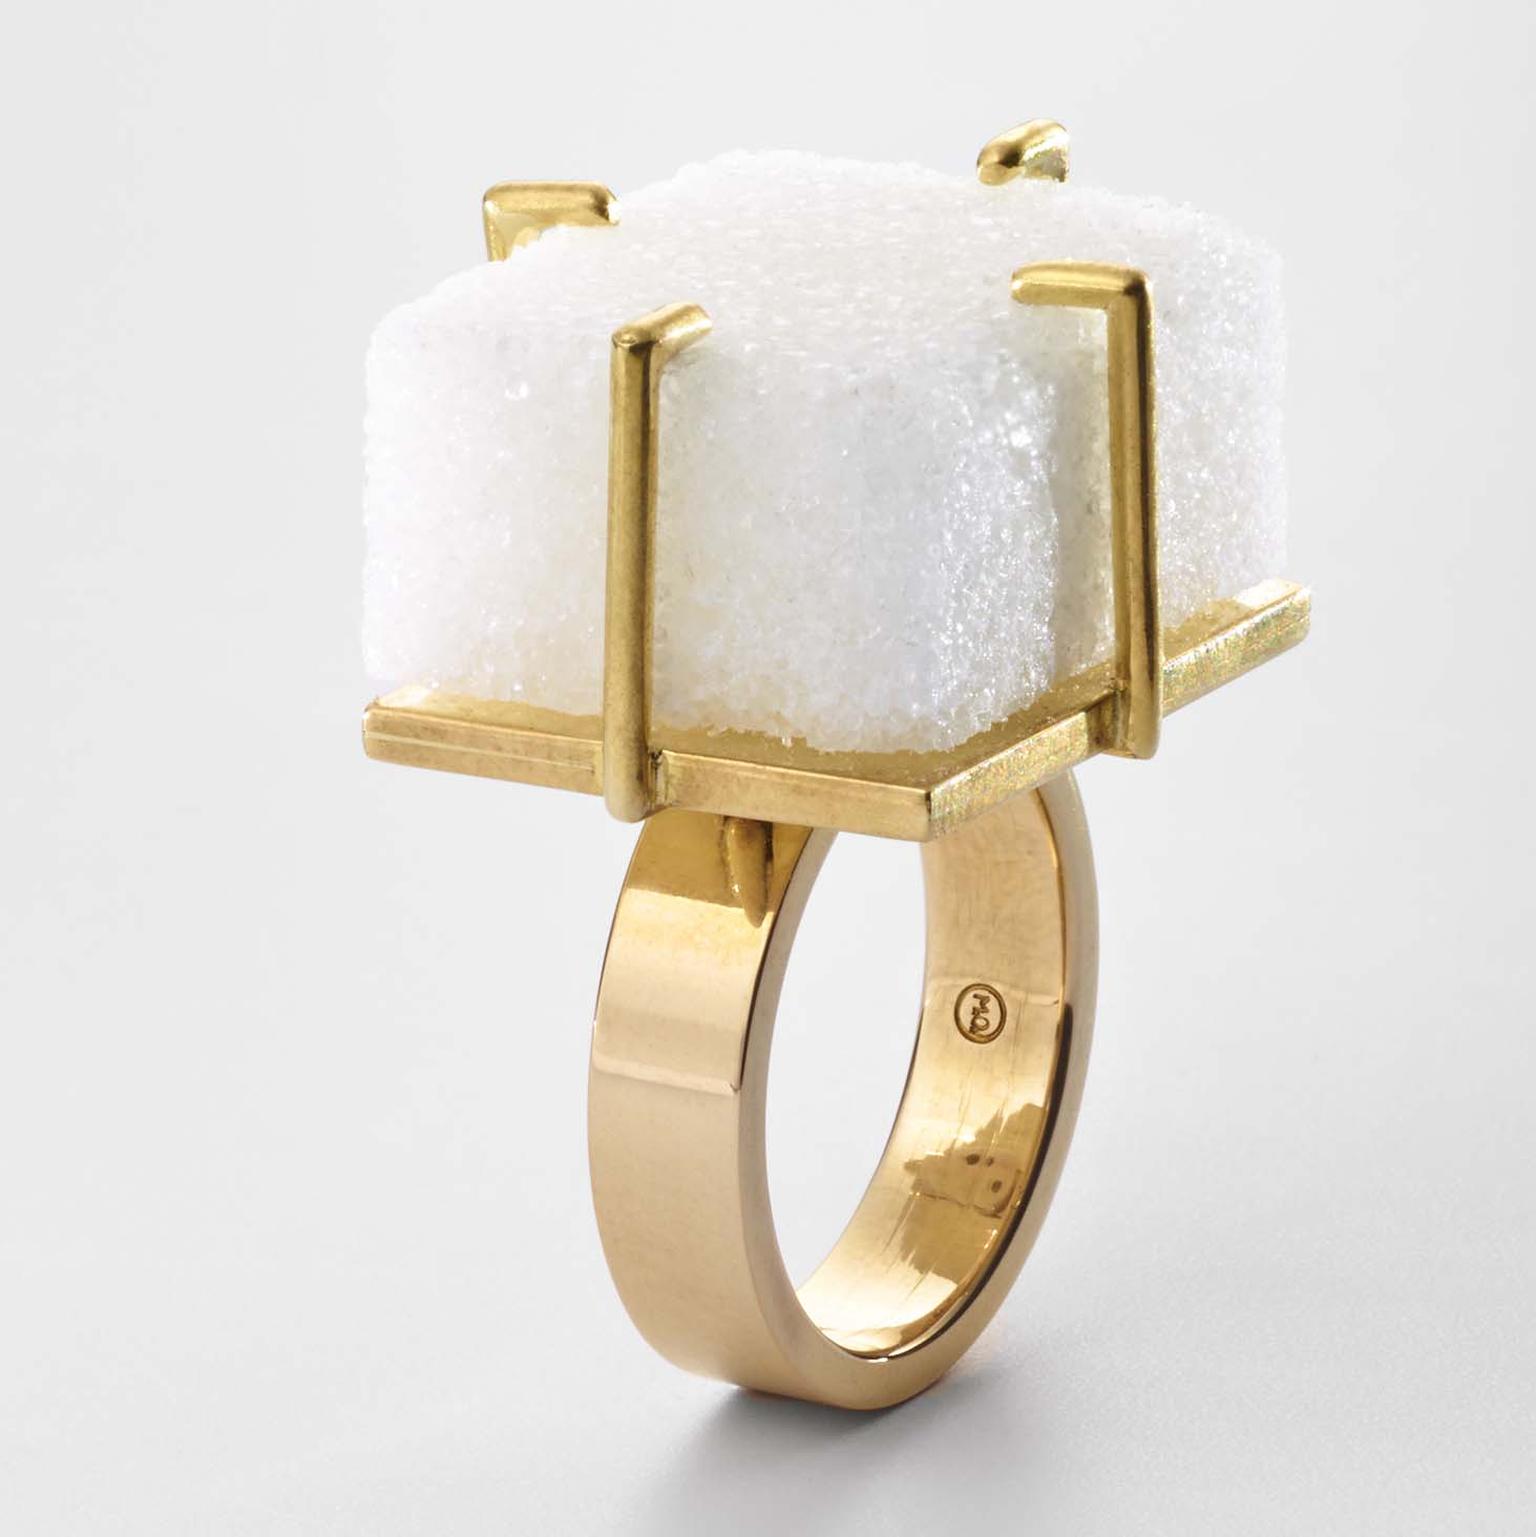 Sugar Cube Ring from Meret Oppenheim